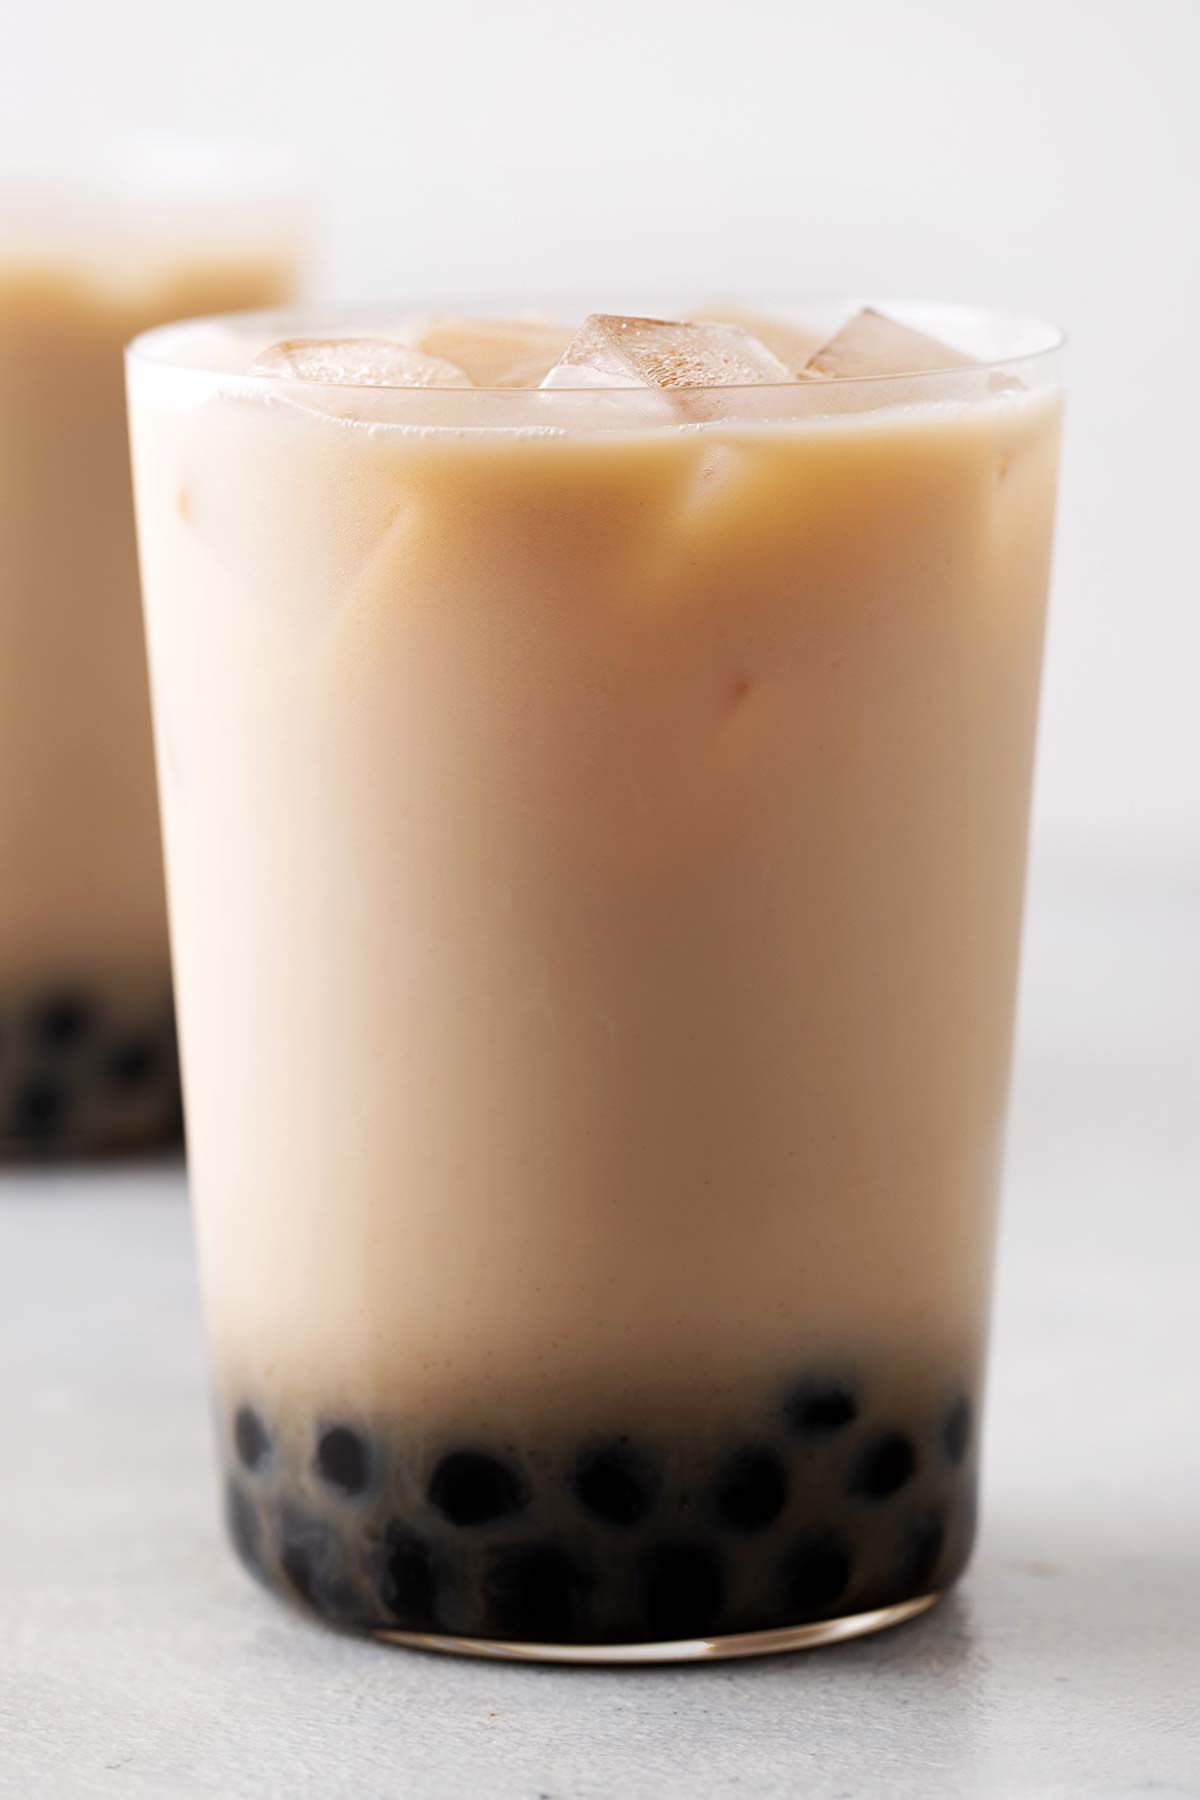 Oolong Bubble Tea fully assembled in a glass.